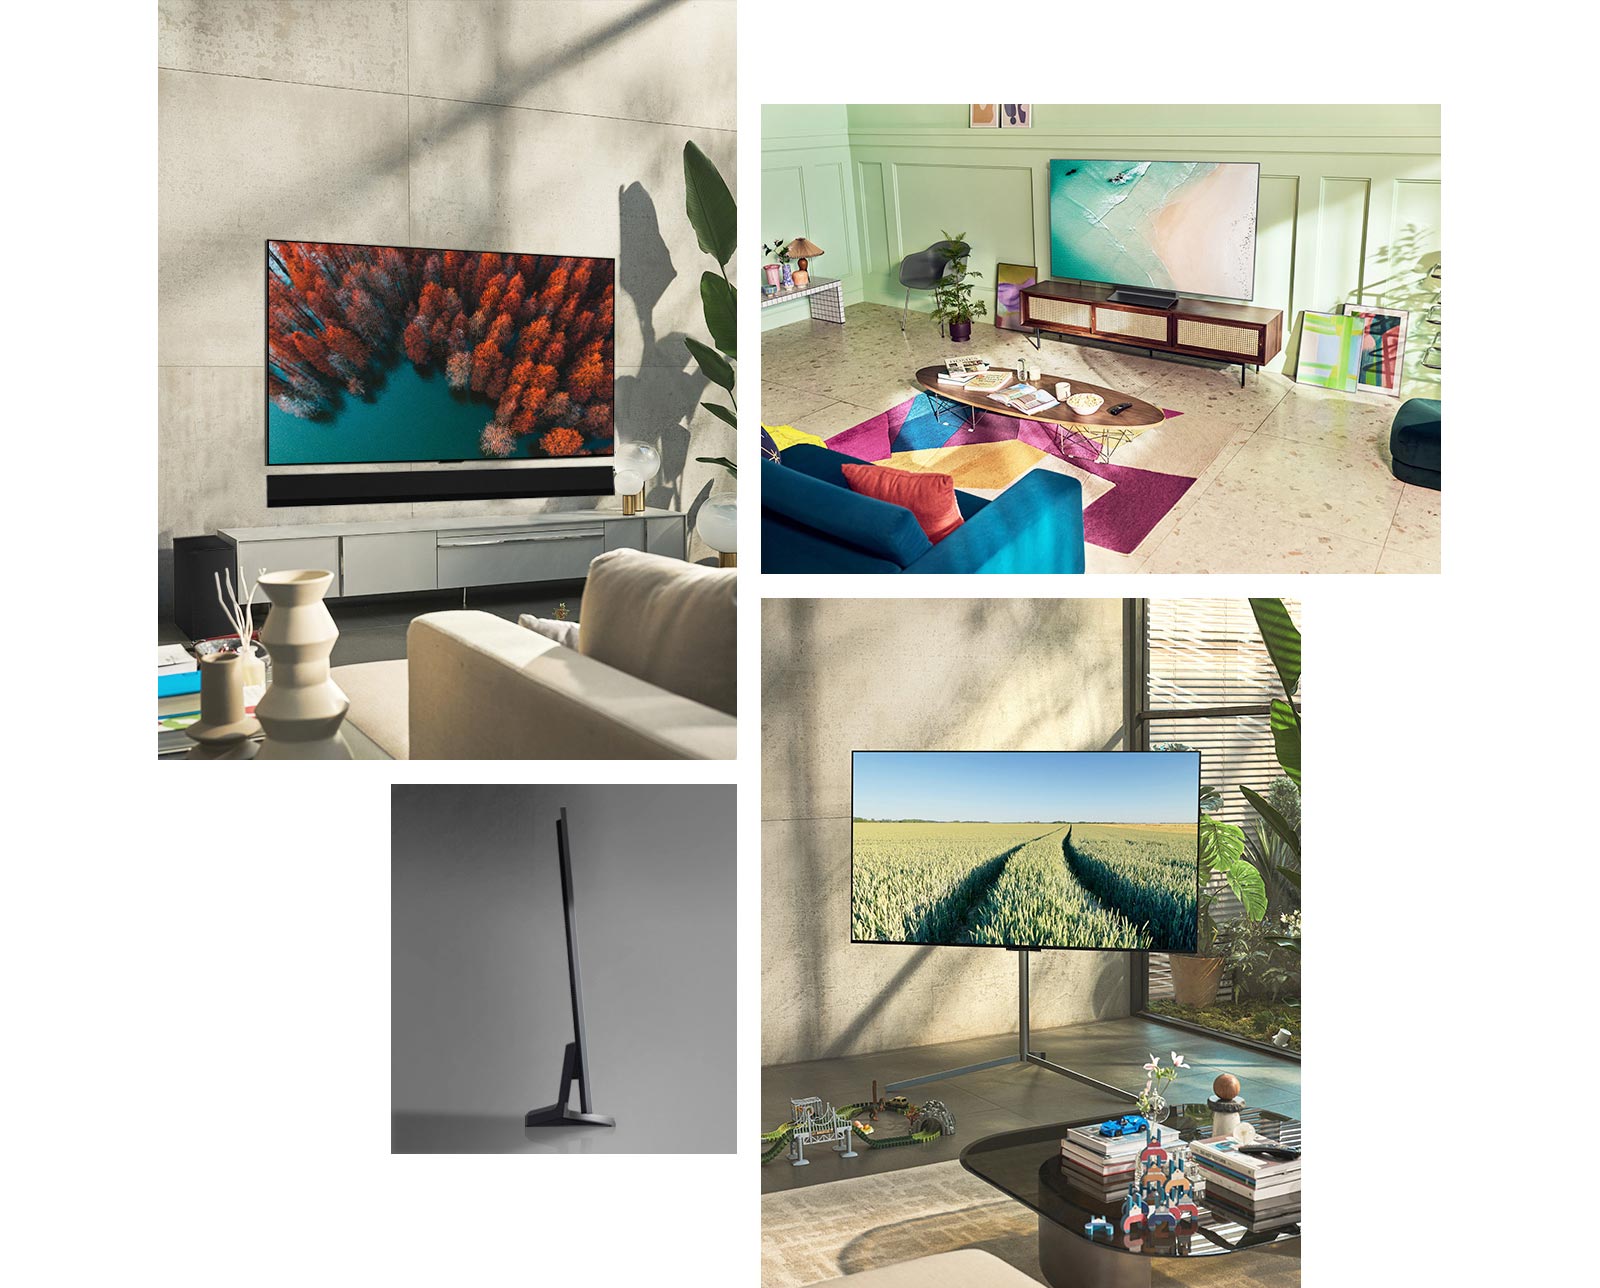 An LG OLED G2 is hung on the wall in a neutral-colored living room with plants and rustic ornaments. An LG OLED G2 sits on a TV stand in a mint green room with colorful art and furnishings. An LG OLED G2 with Gallery Stand is in the corner of a room in a family home. A side view of the ultra-slim edge of LG OLED G2.